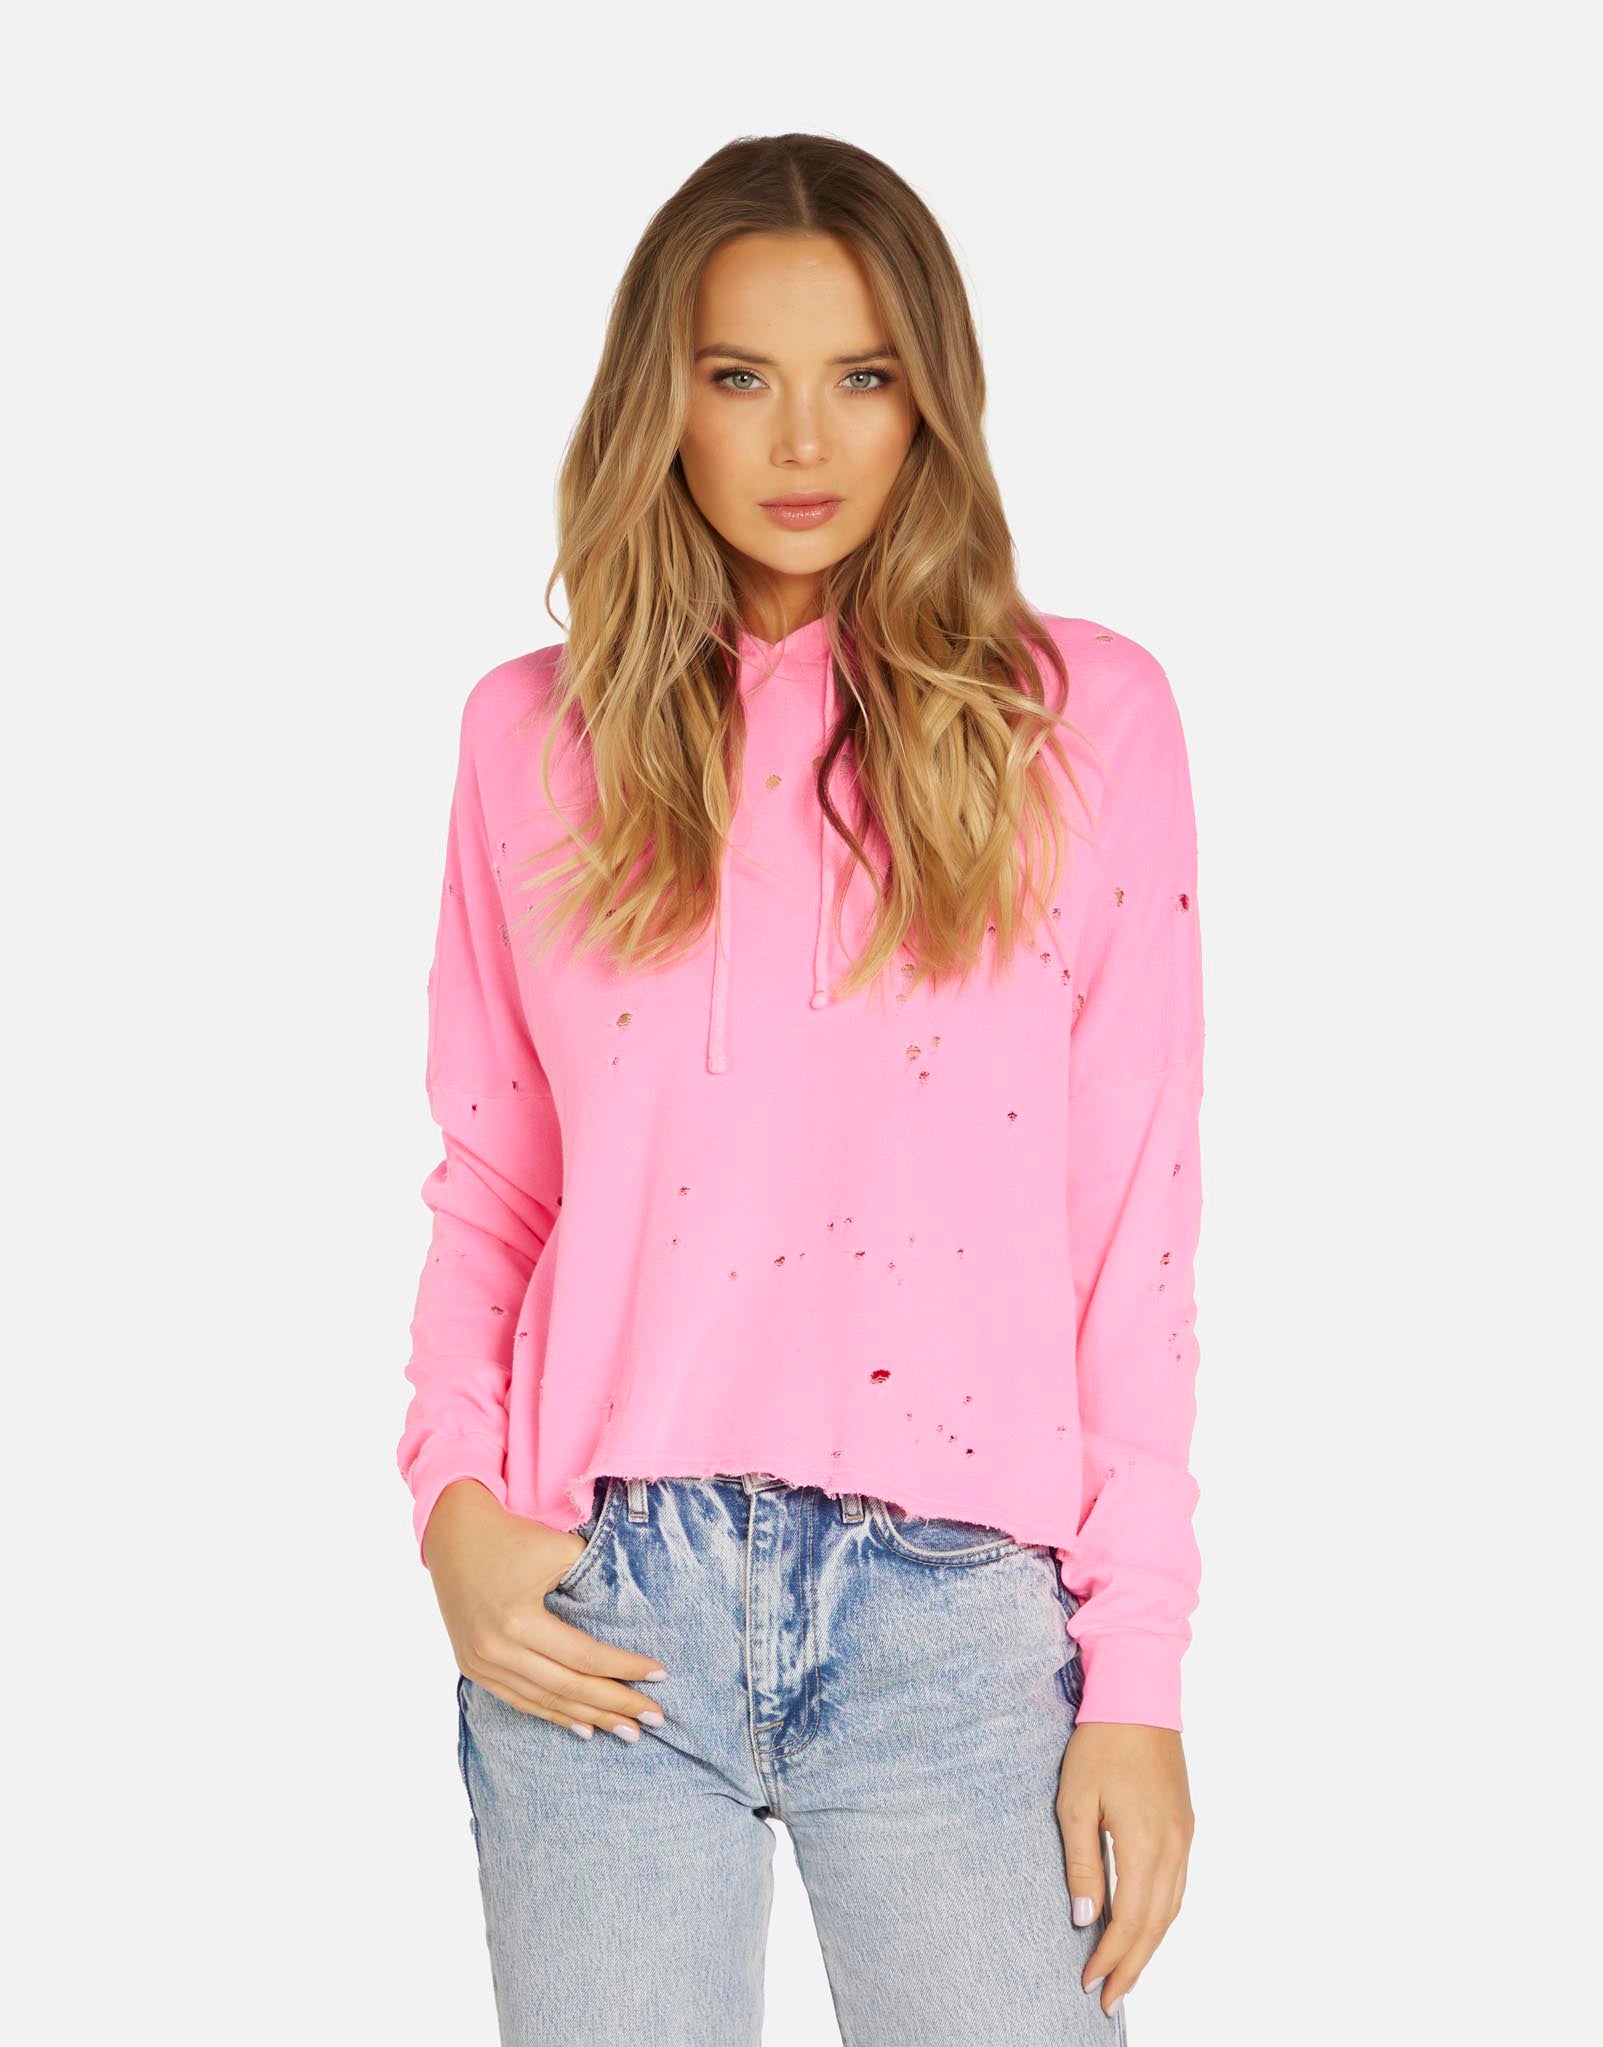 Lowry LE Distressed Hoodie - Neon Pink XS